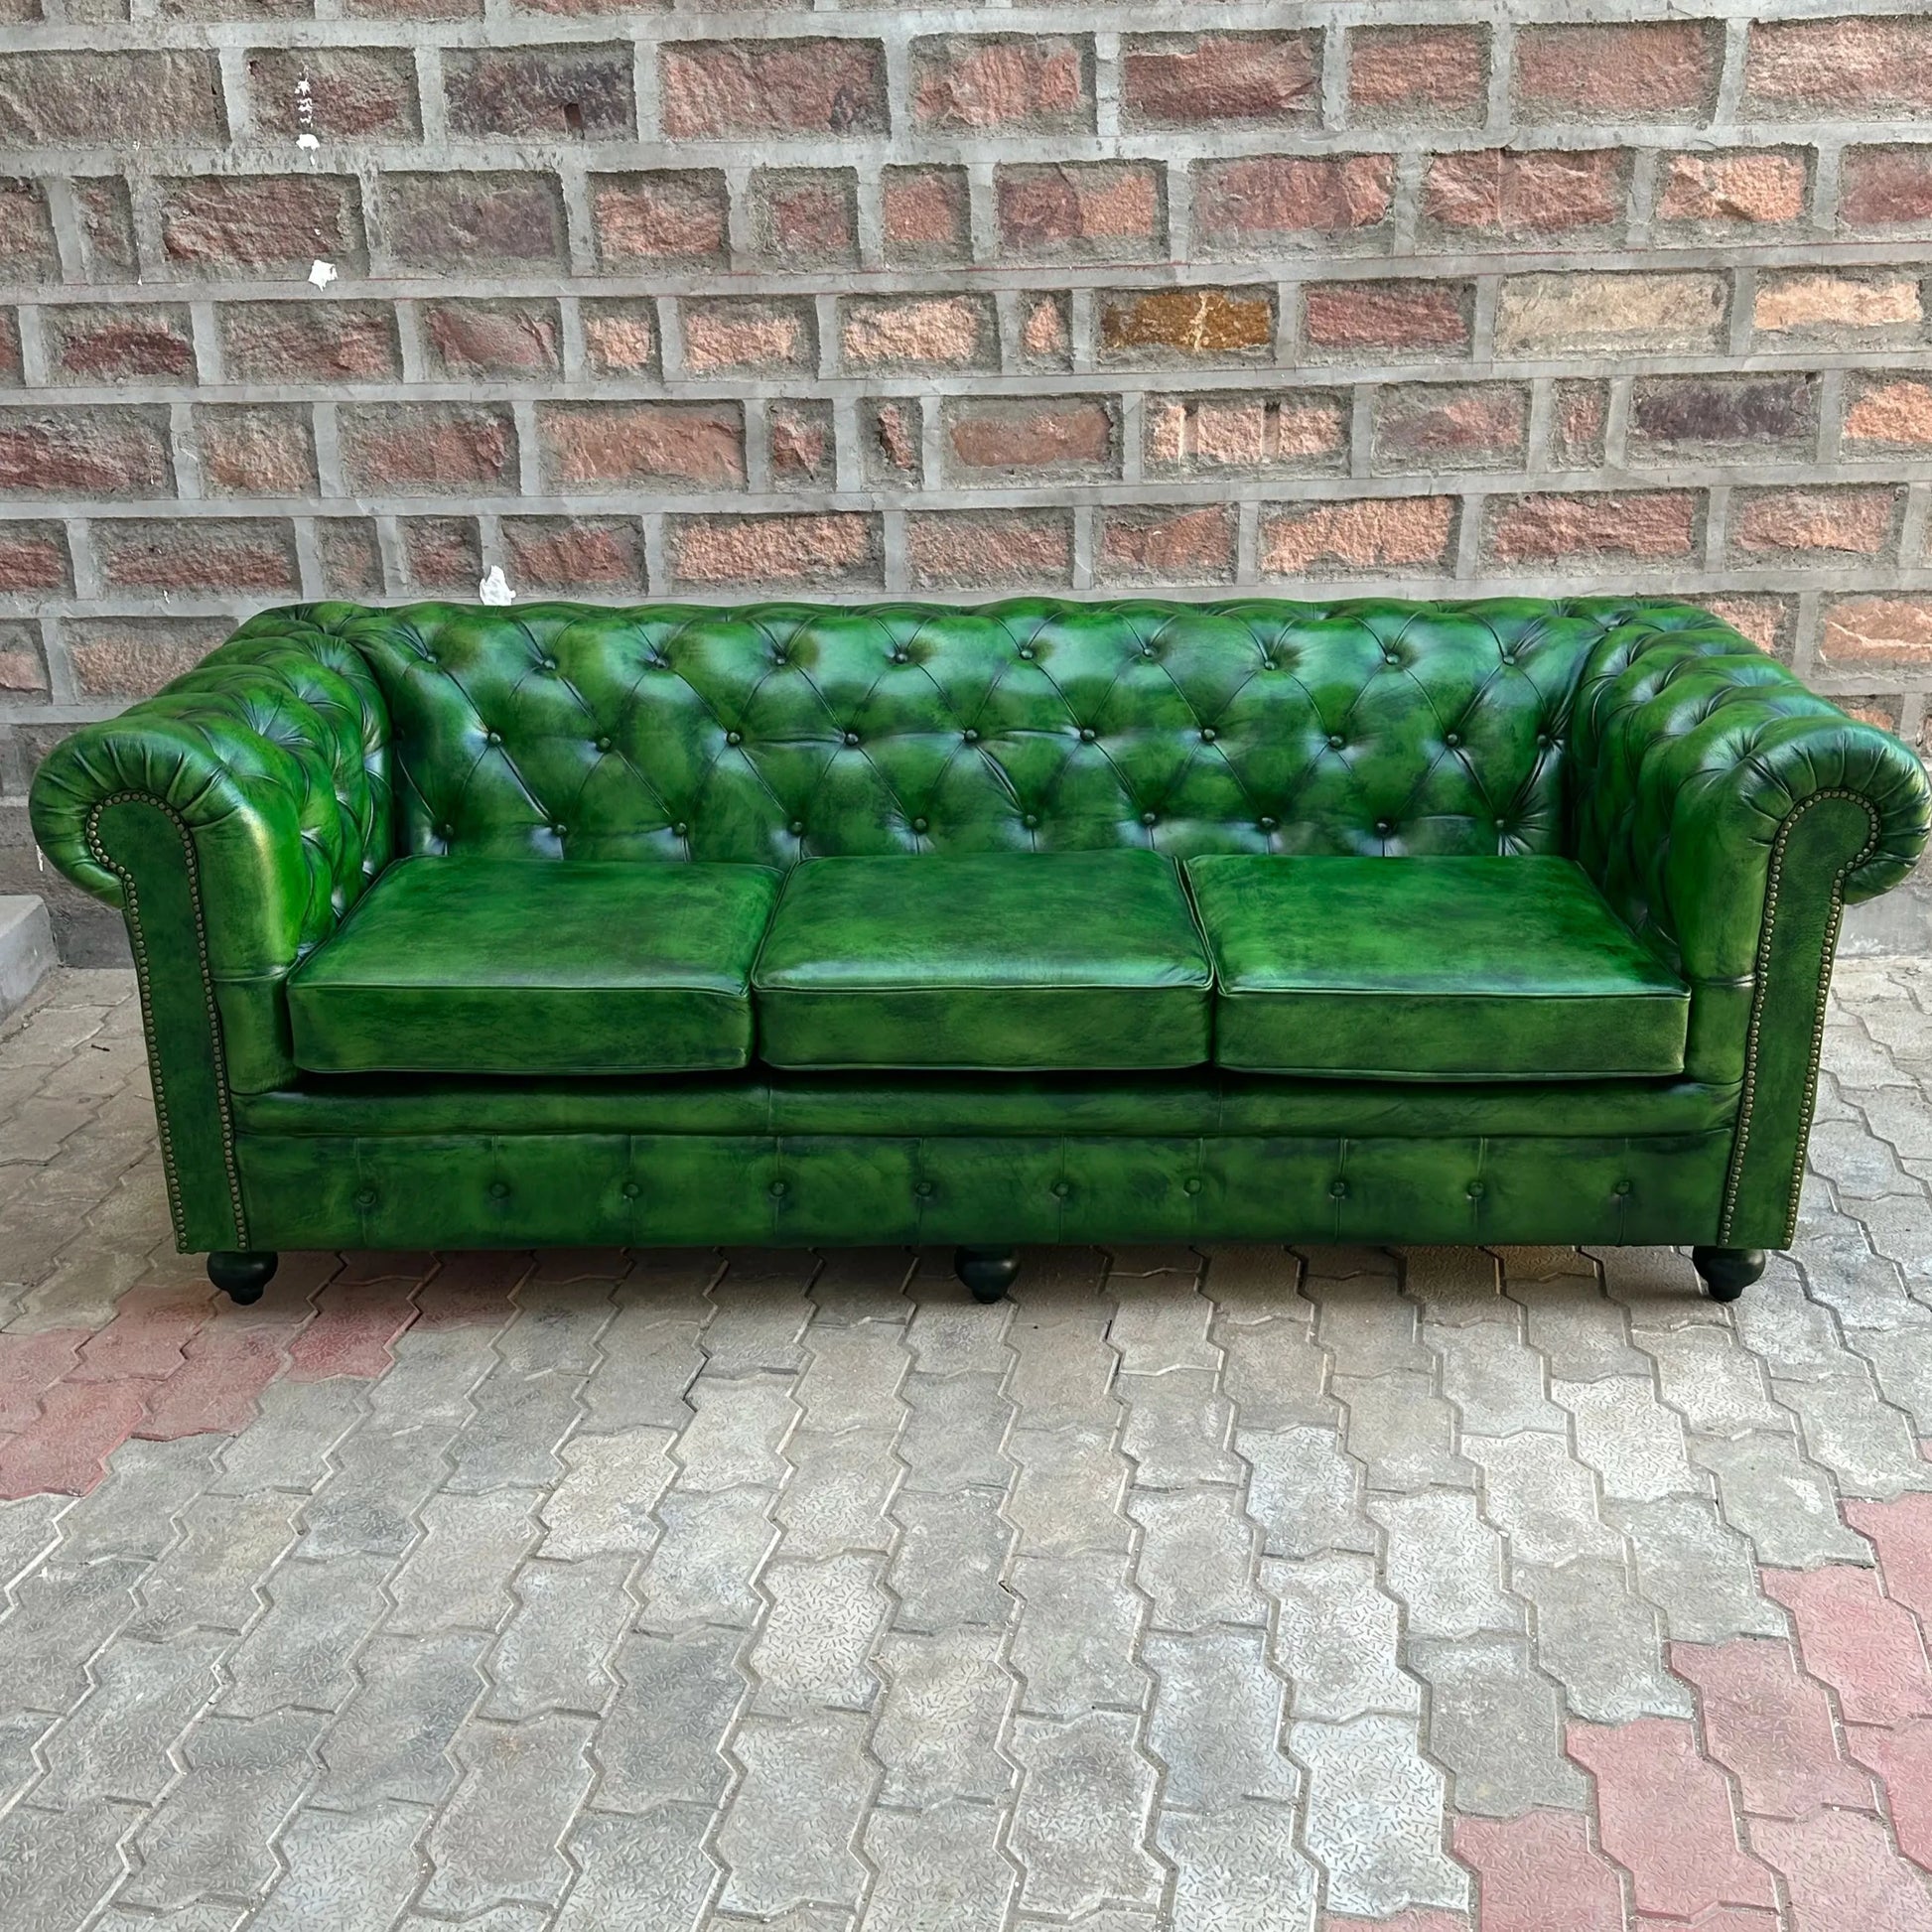 87" Sofa Normal Cushions | Polo Green Chesterfield Leather Sofa with Normal Cushions (PG-3C) by Rising Tide Design Co.